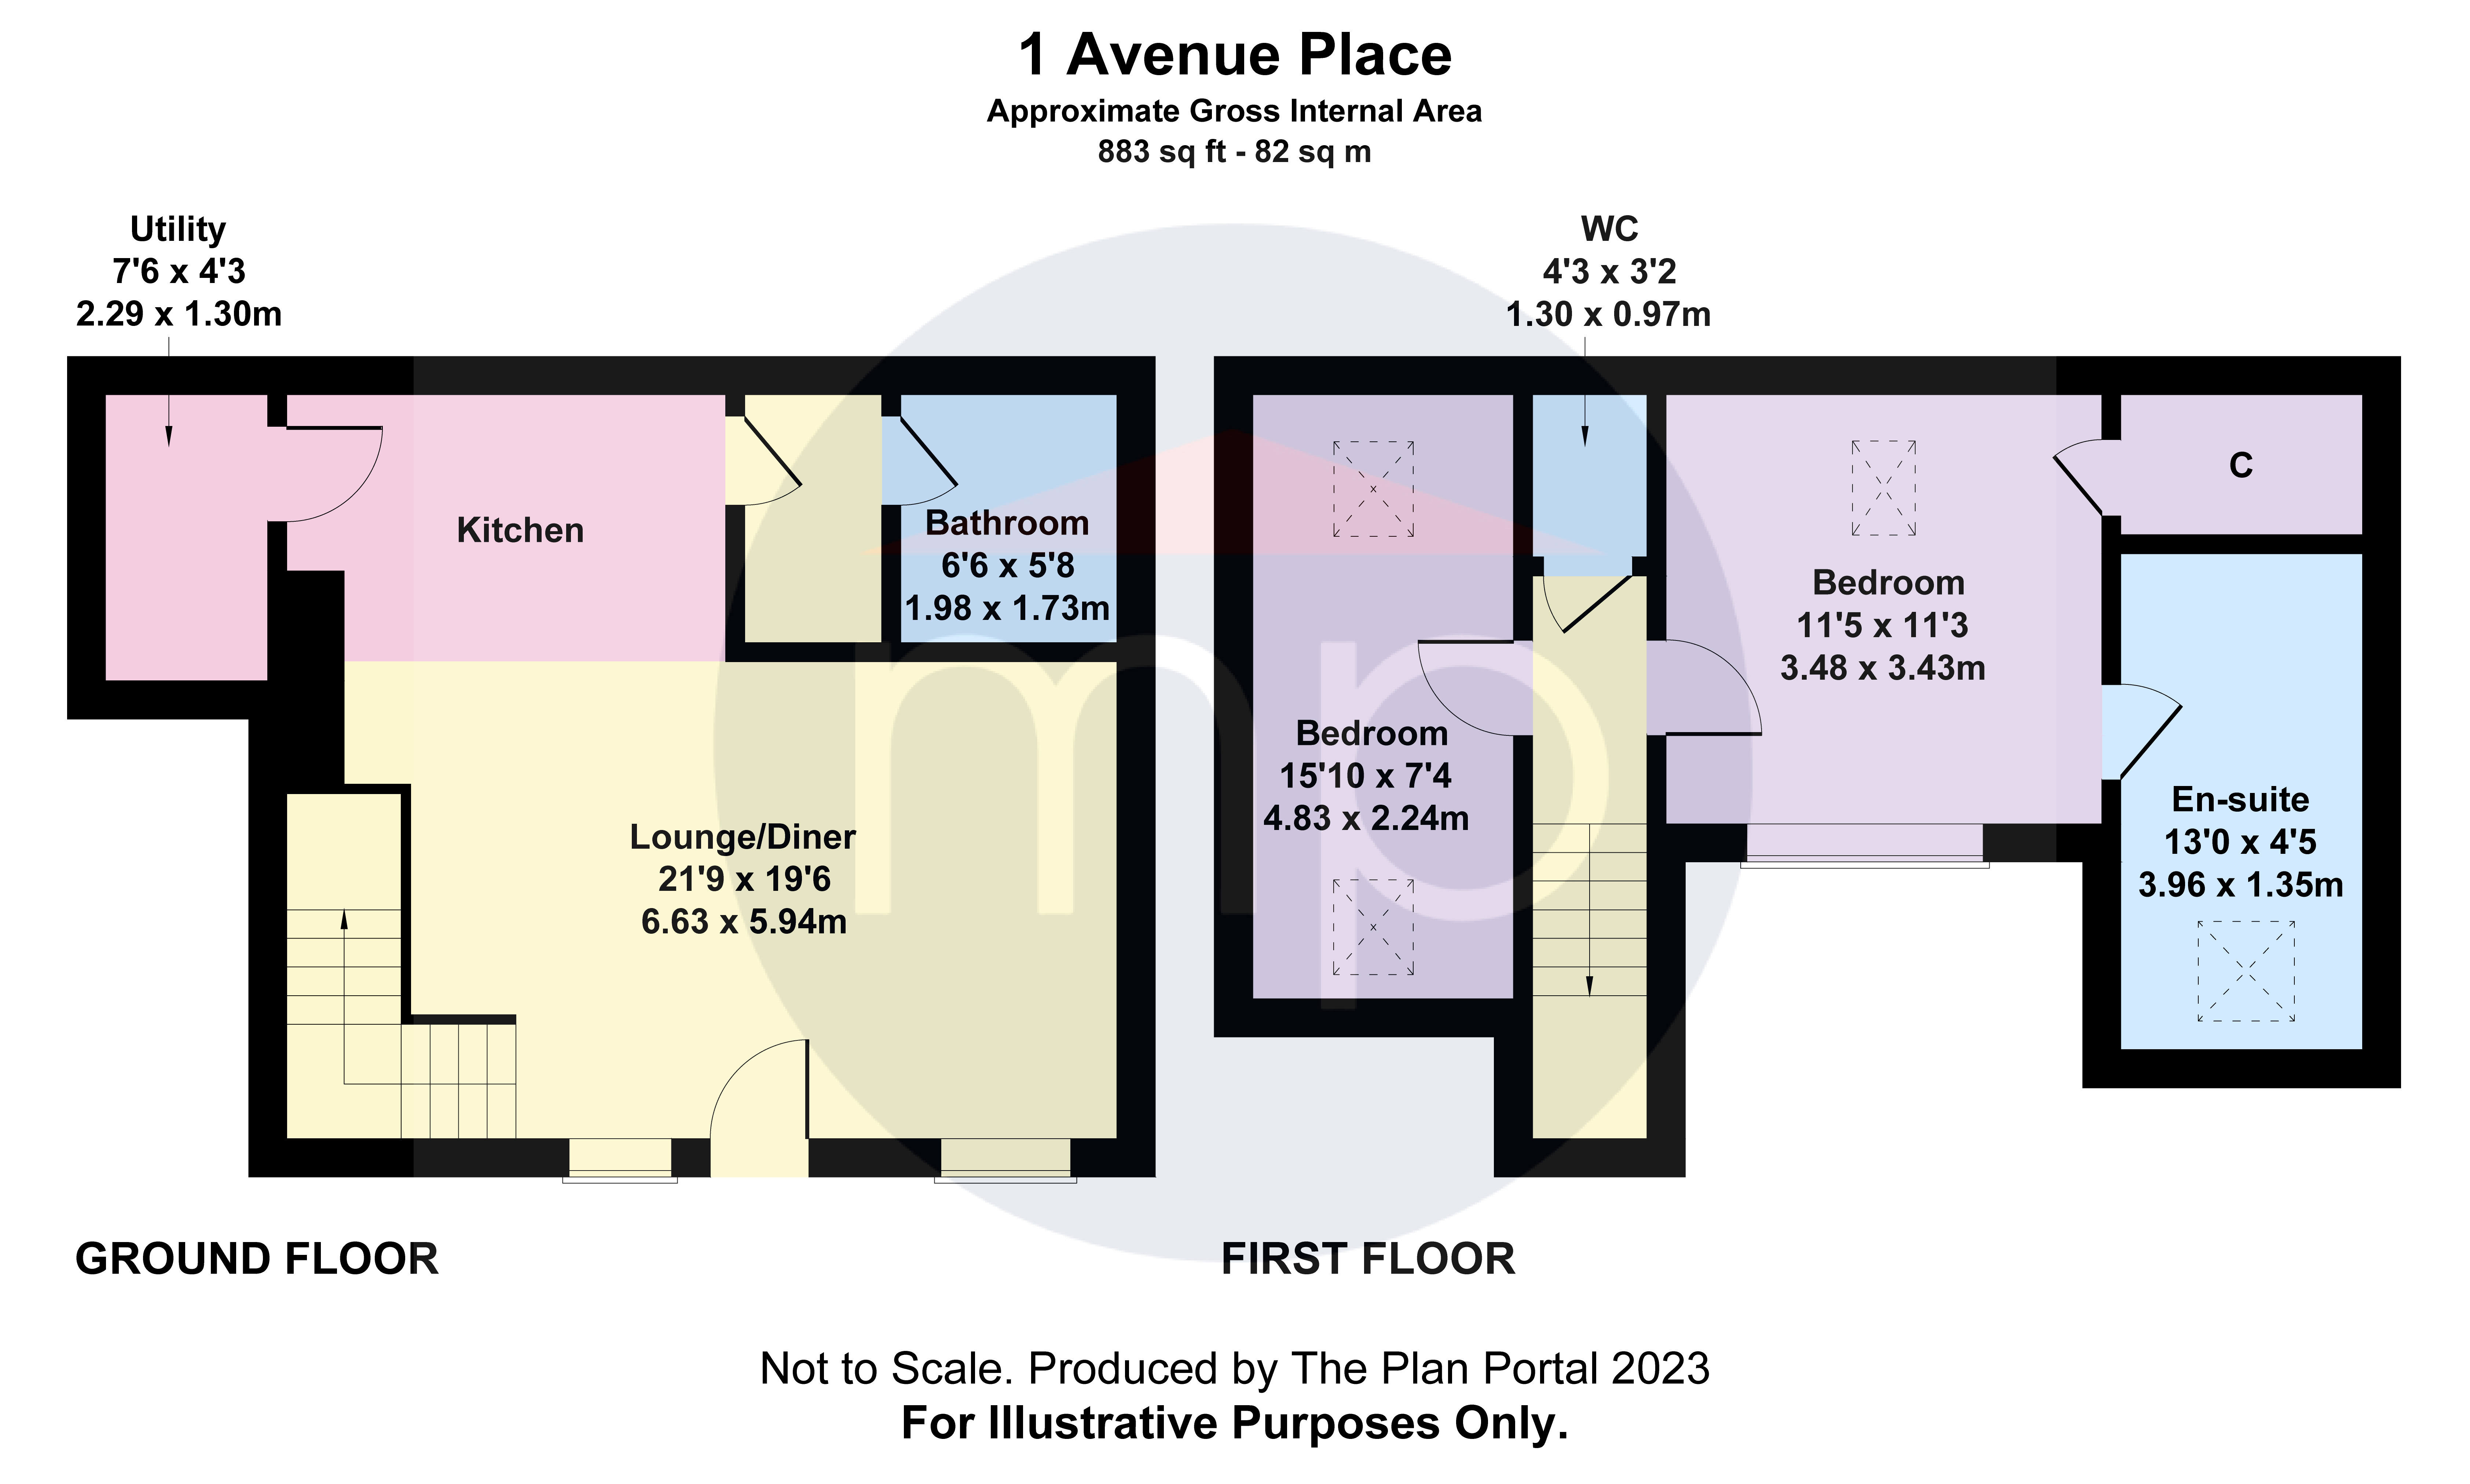 7 bed house for sale - Property floorplan